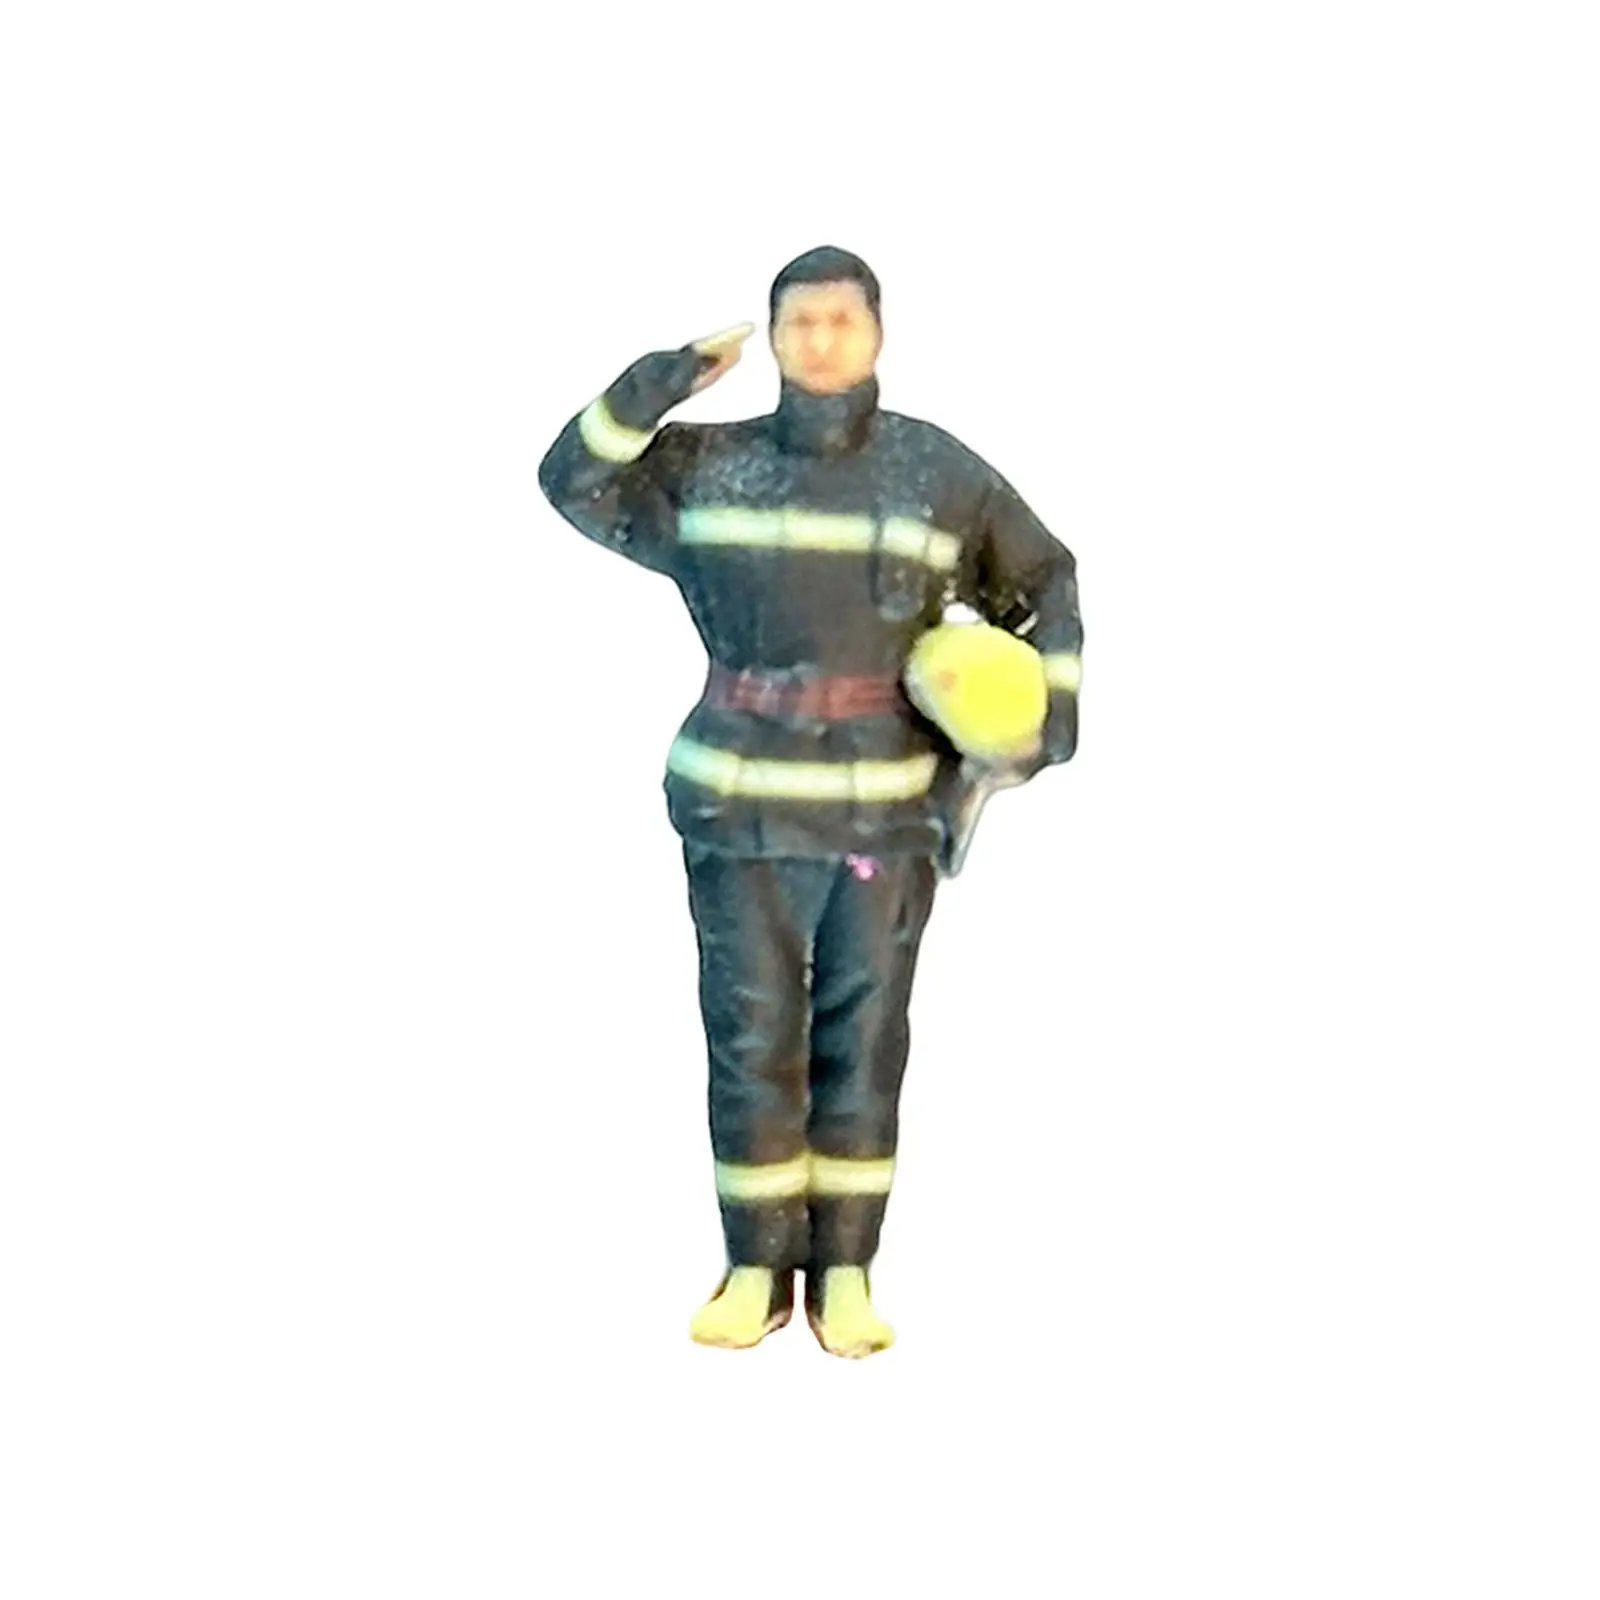 1/64 Scale Firefighter Model Collectibles Model Trains People Figures for Photography Props Building Miniature Scene Accessories